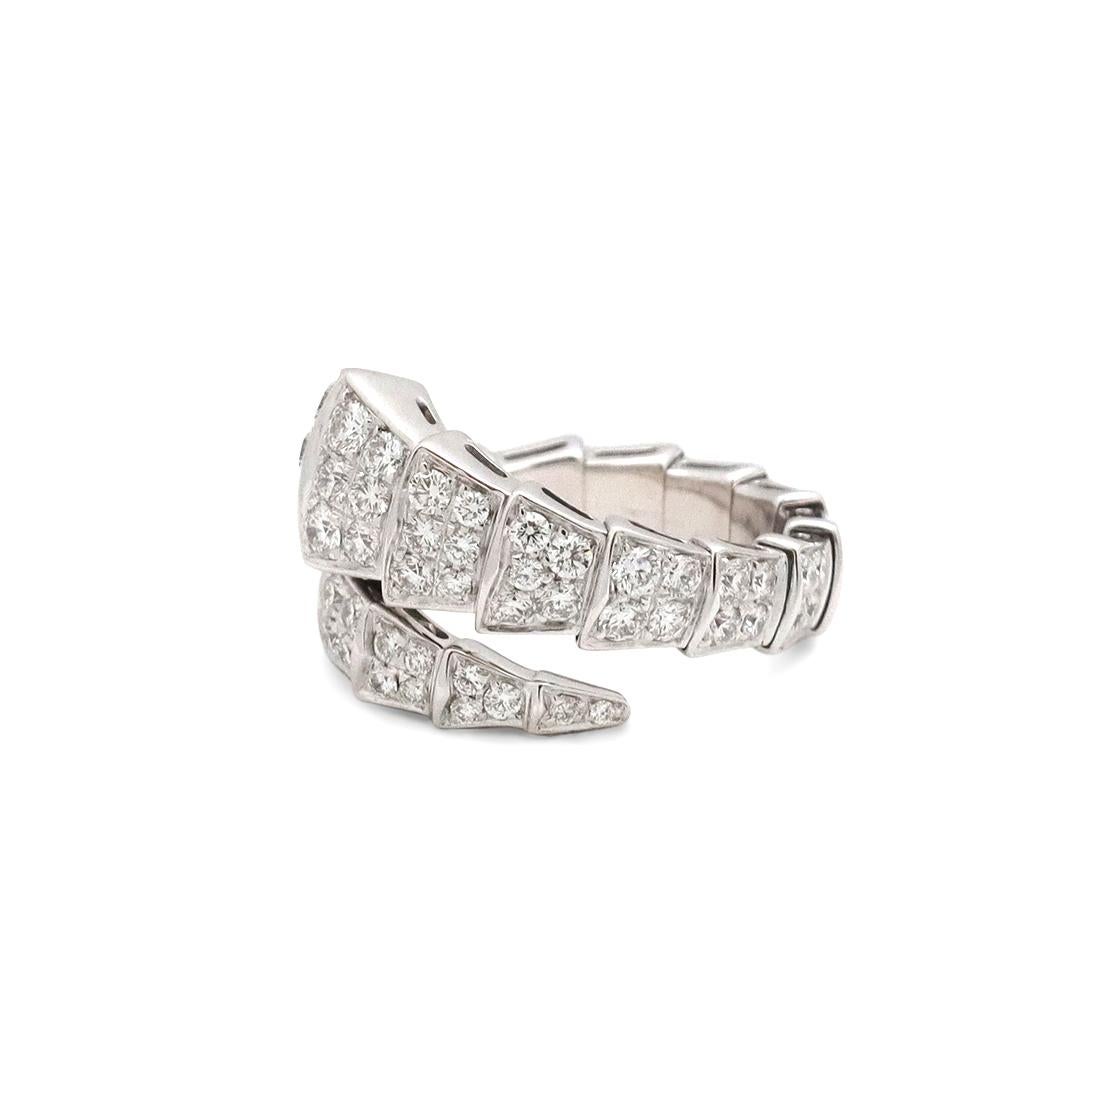 Authentic Bvlgari 'Serpenti Viper' ring crafted in 18 karat white gold.  The serpentine design coils around the finger featuring scales and a snake head that are pavé set with an estimated 1.58 carats of round brilliant cut diamonds (G-H color, VS